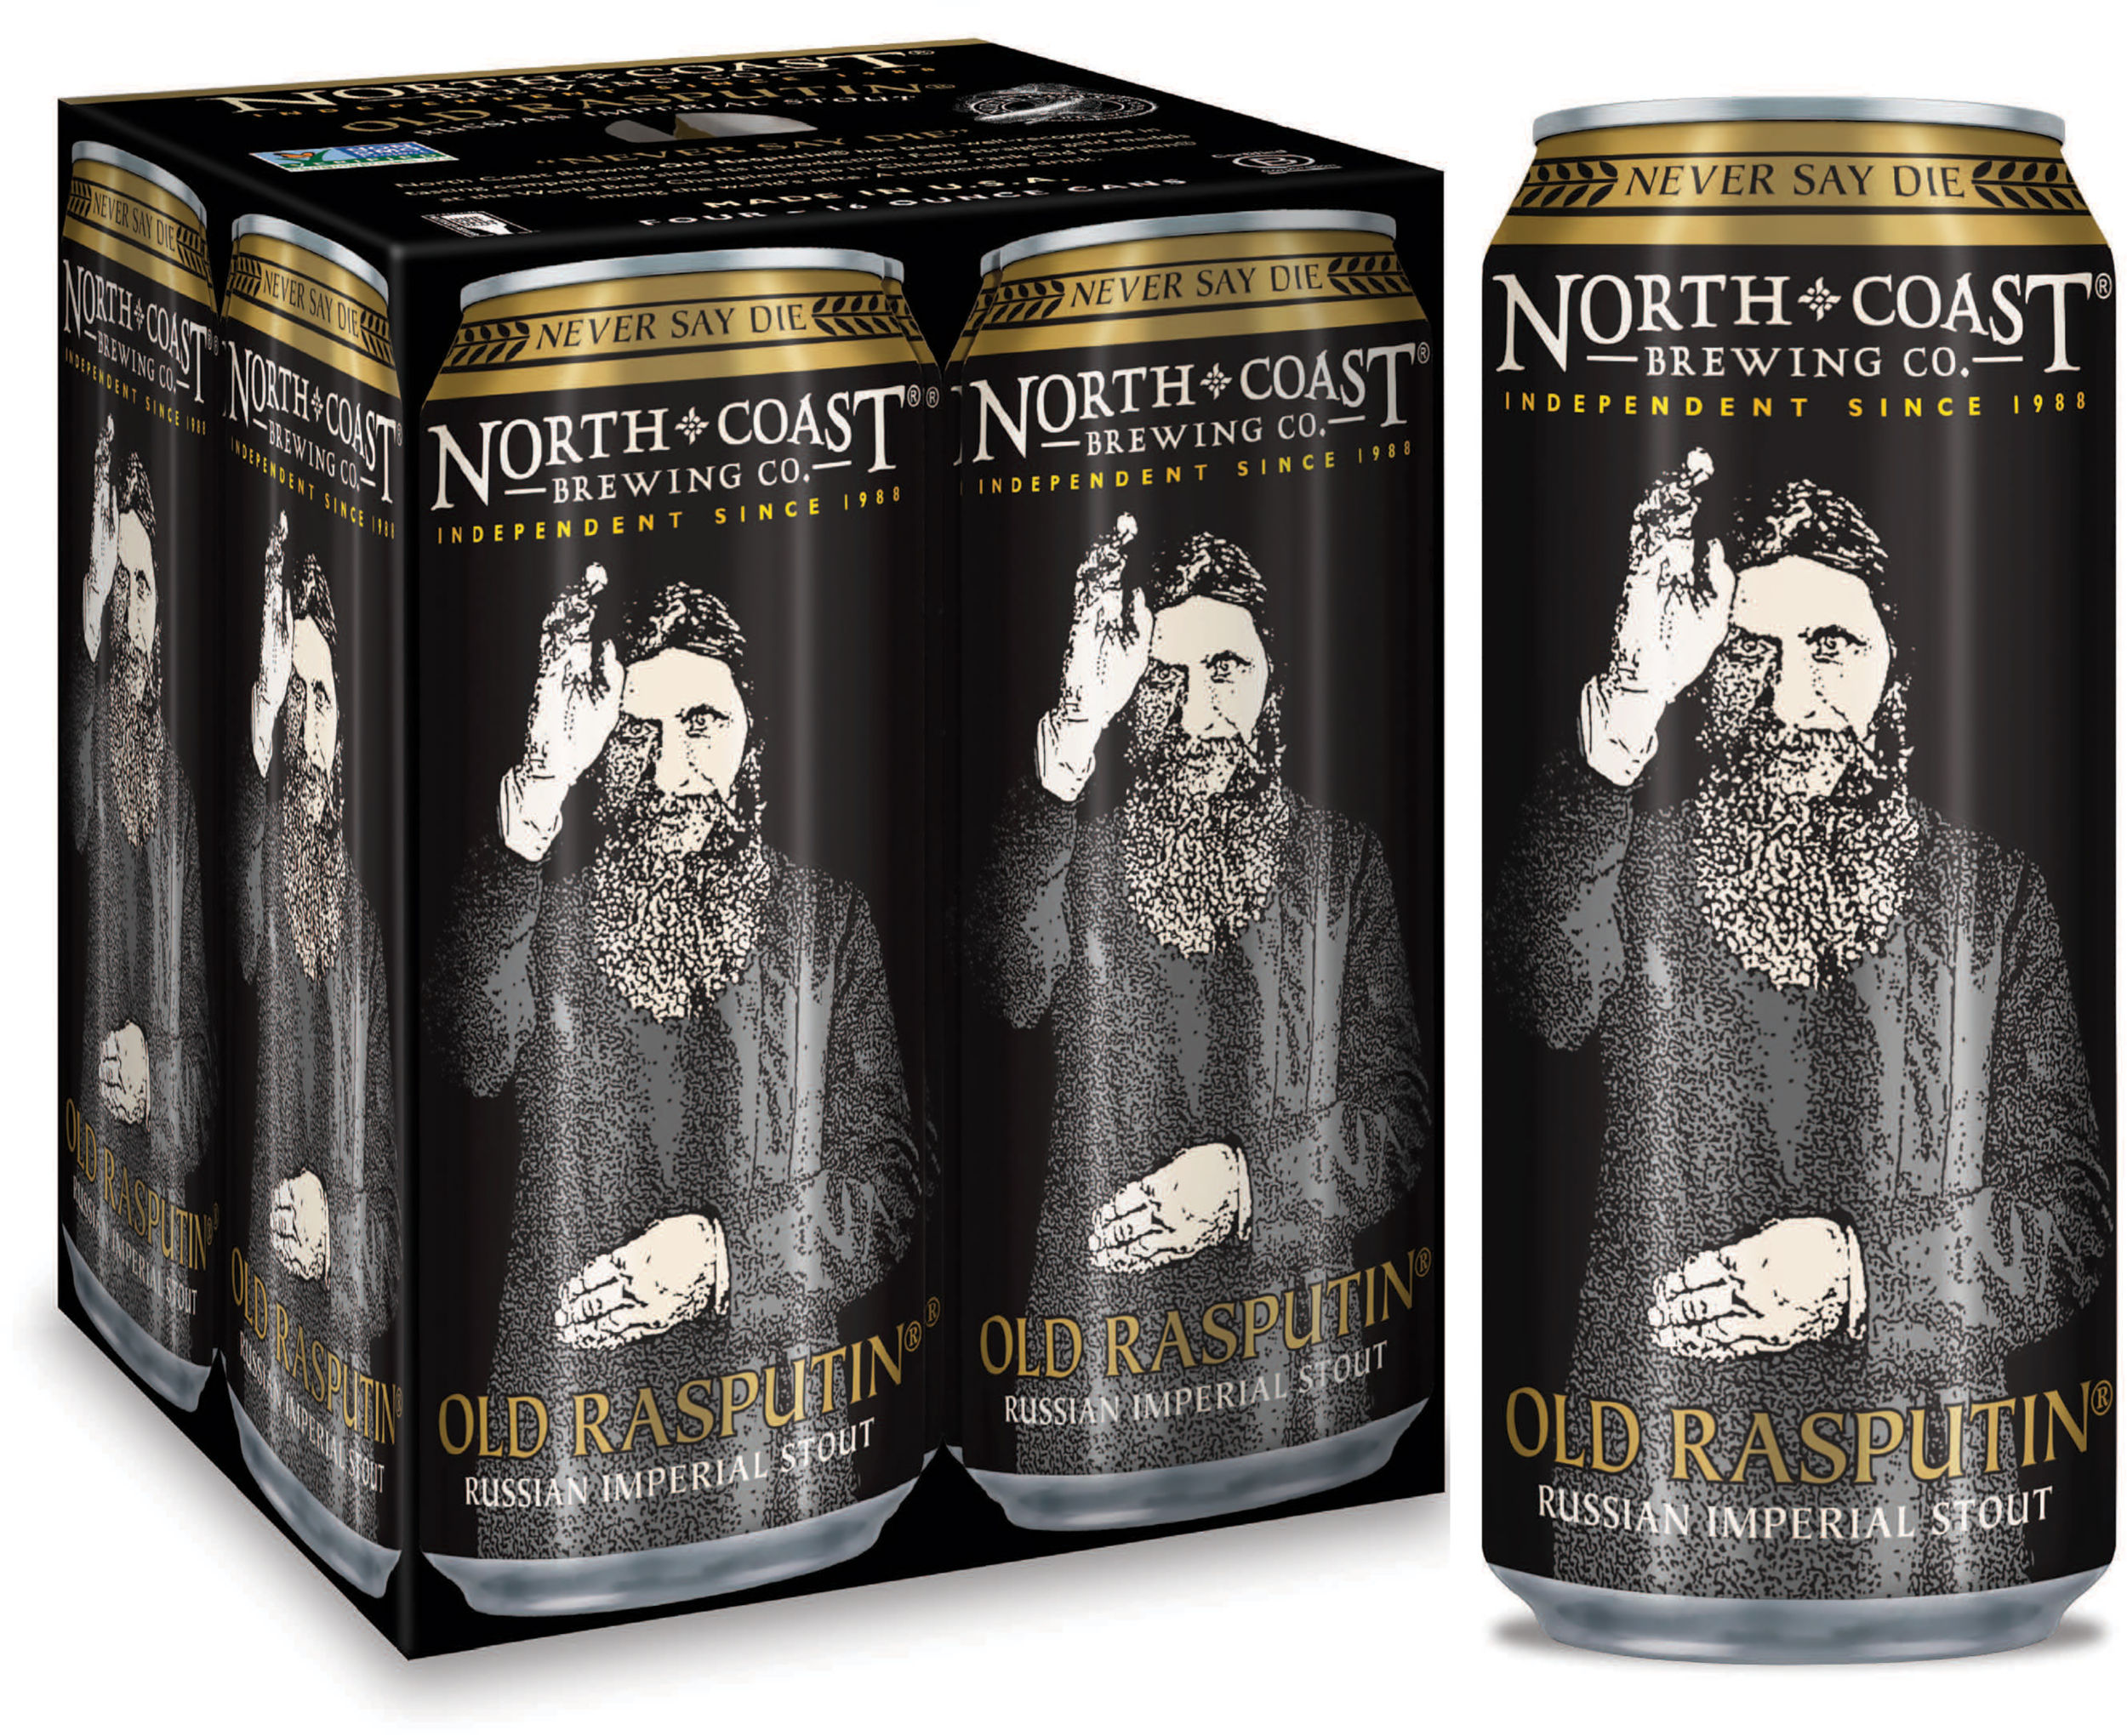 North Coast Brewing Company Announces Old Rasputin Russian Imperial Stout in Cans!